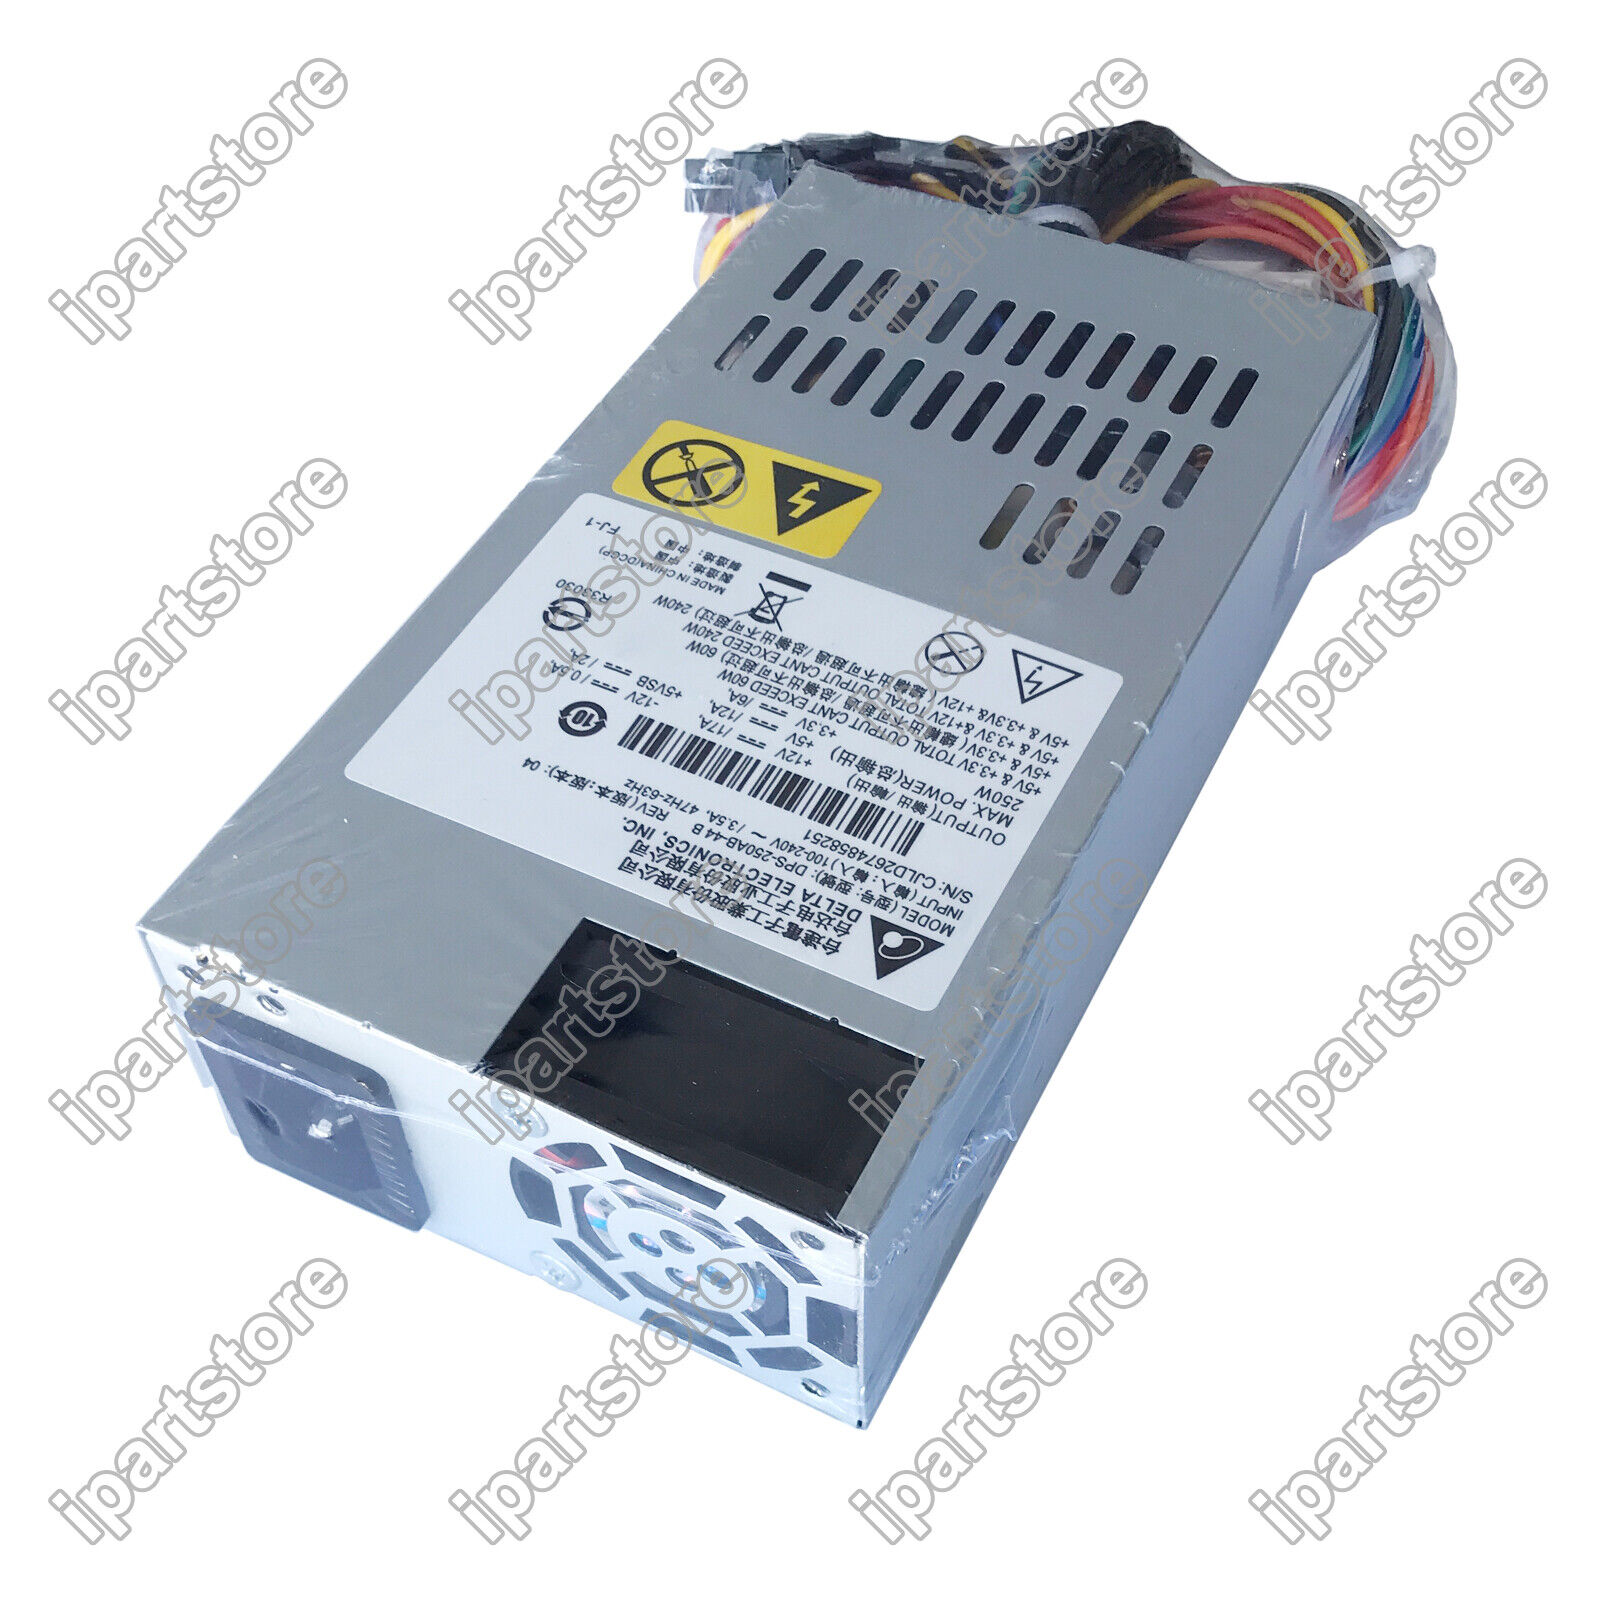 New 250W Power Supply for Delta DPS-250AB-44B 1Uflex Server NAS Host Replacement